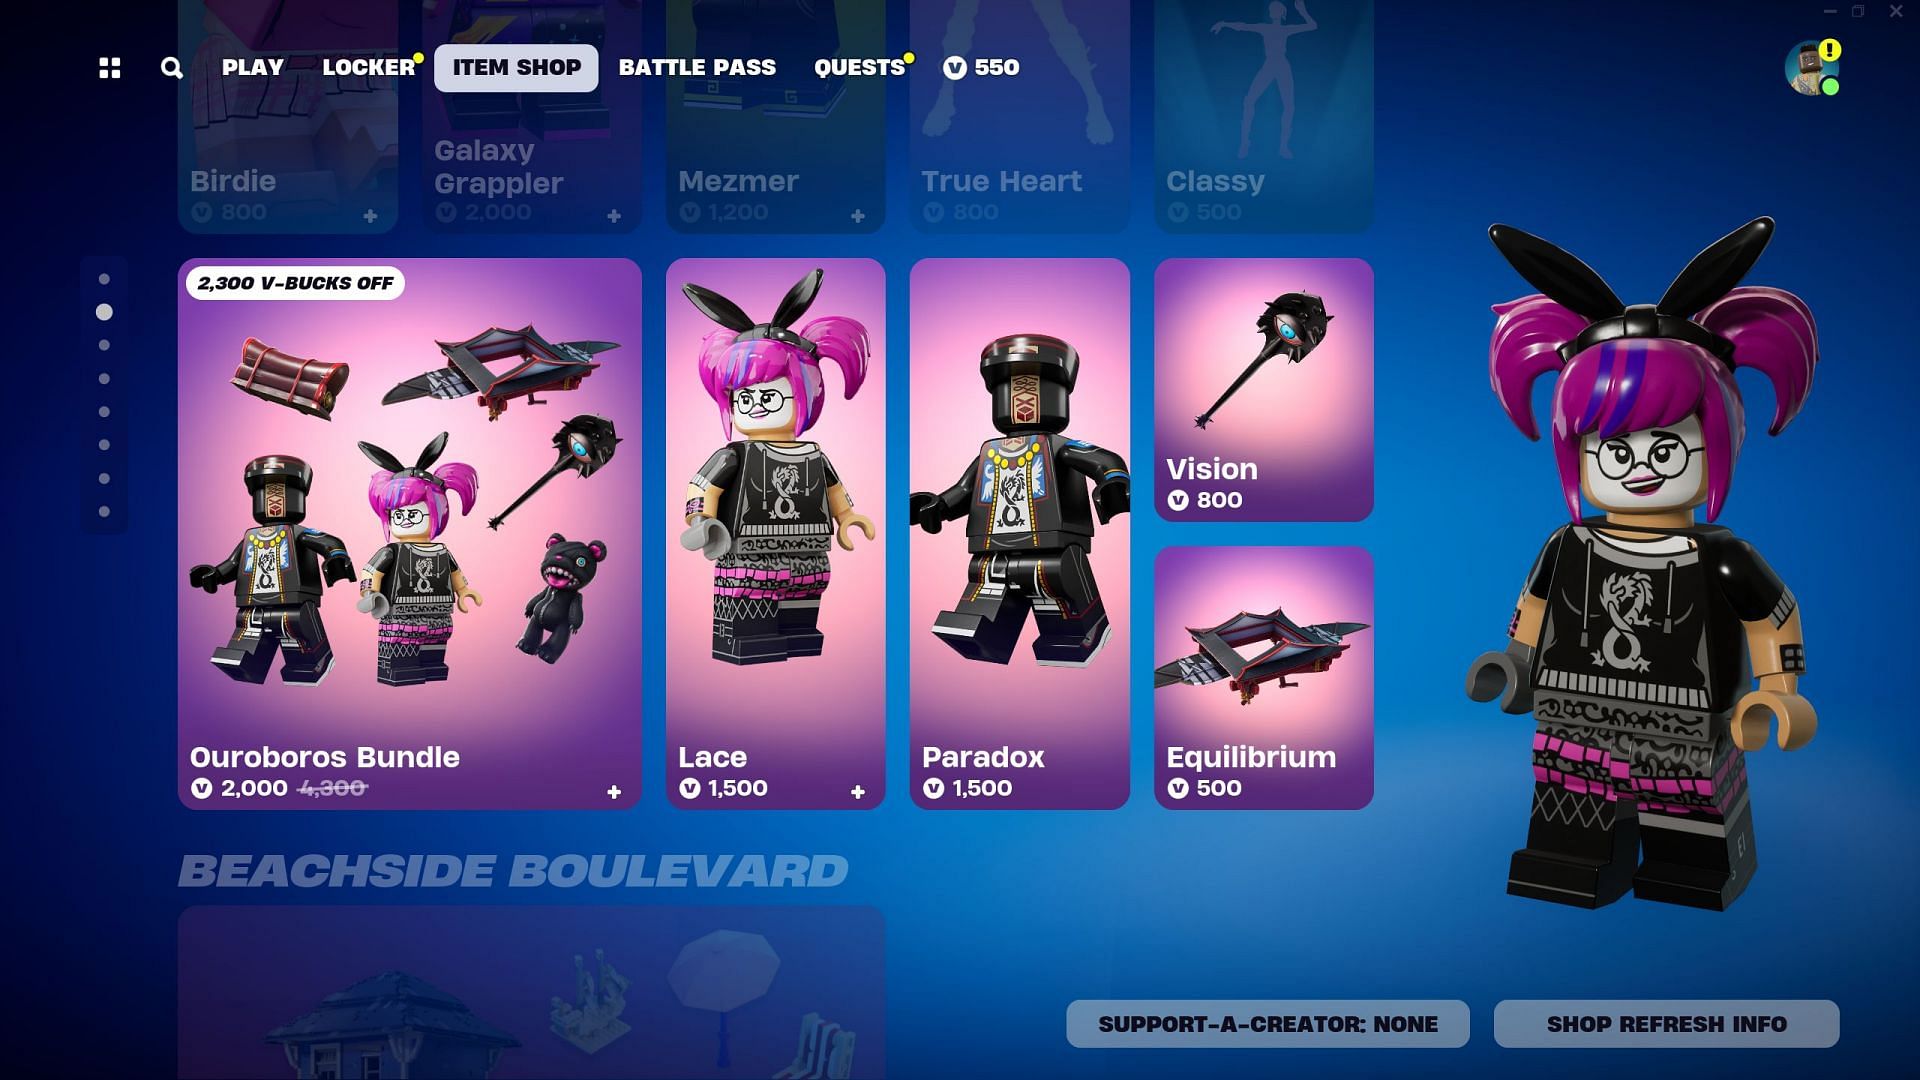 Lace and Paradox Skins are currently listed in the Item Shop (Image via Epic Games/Fortnite)